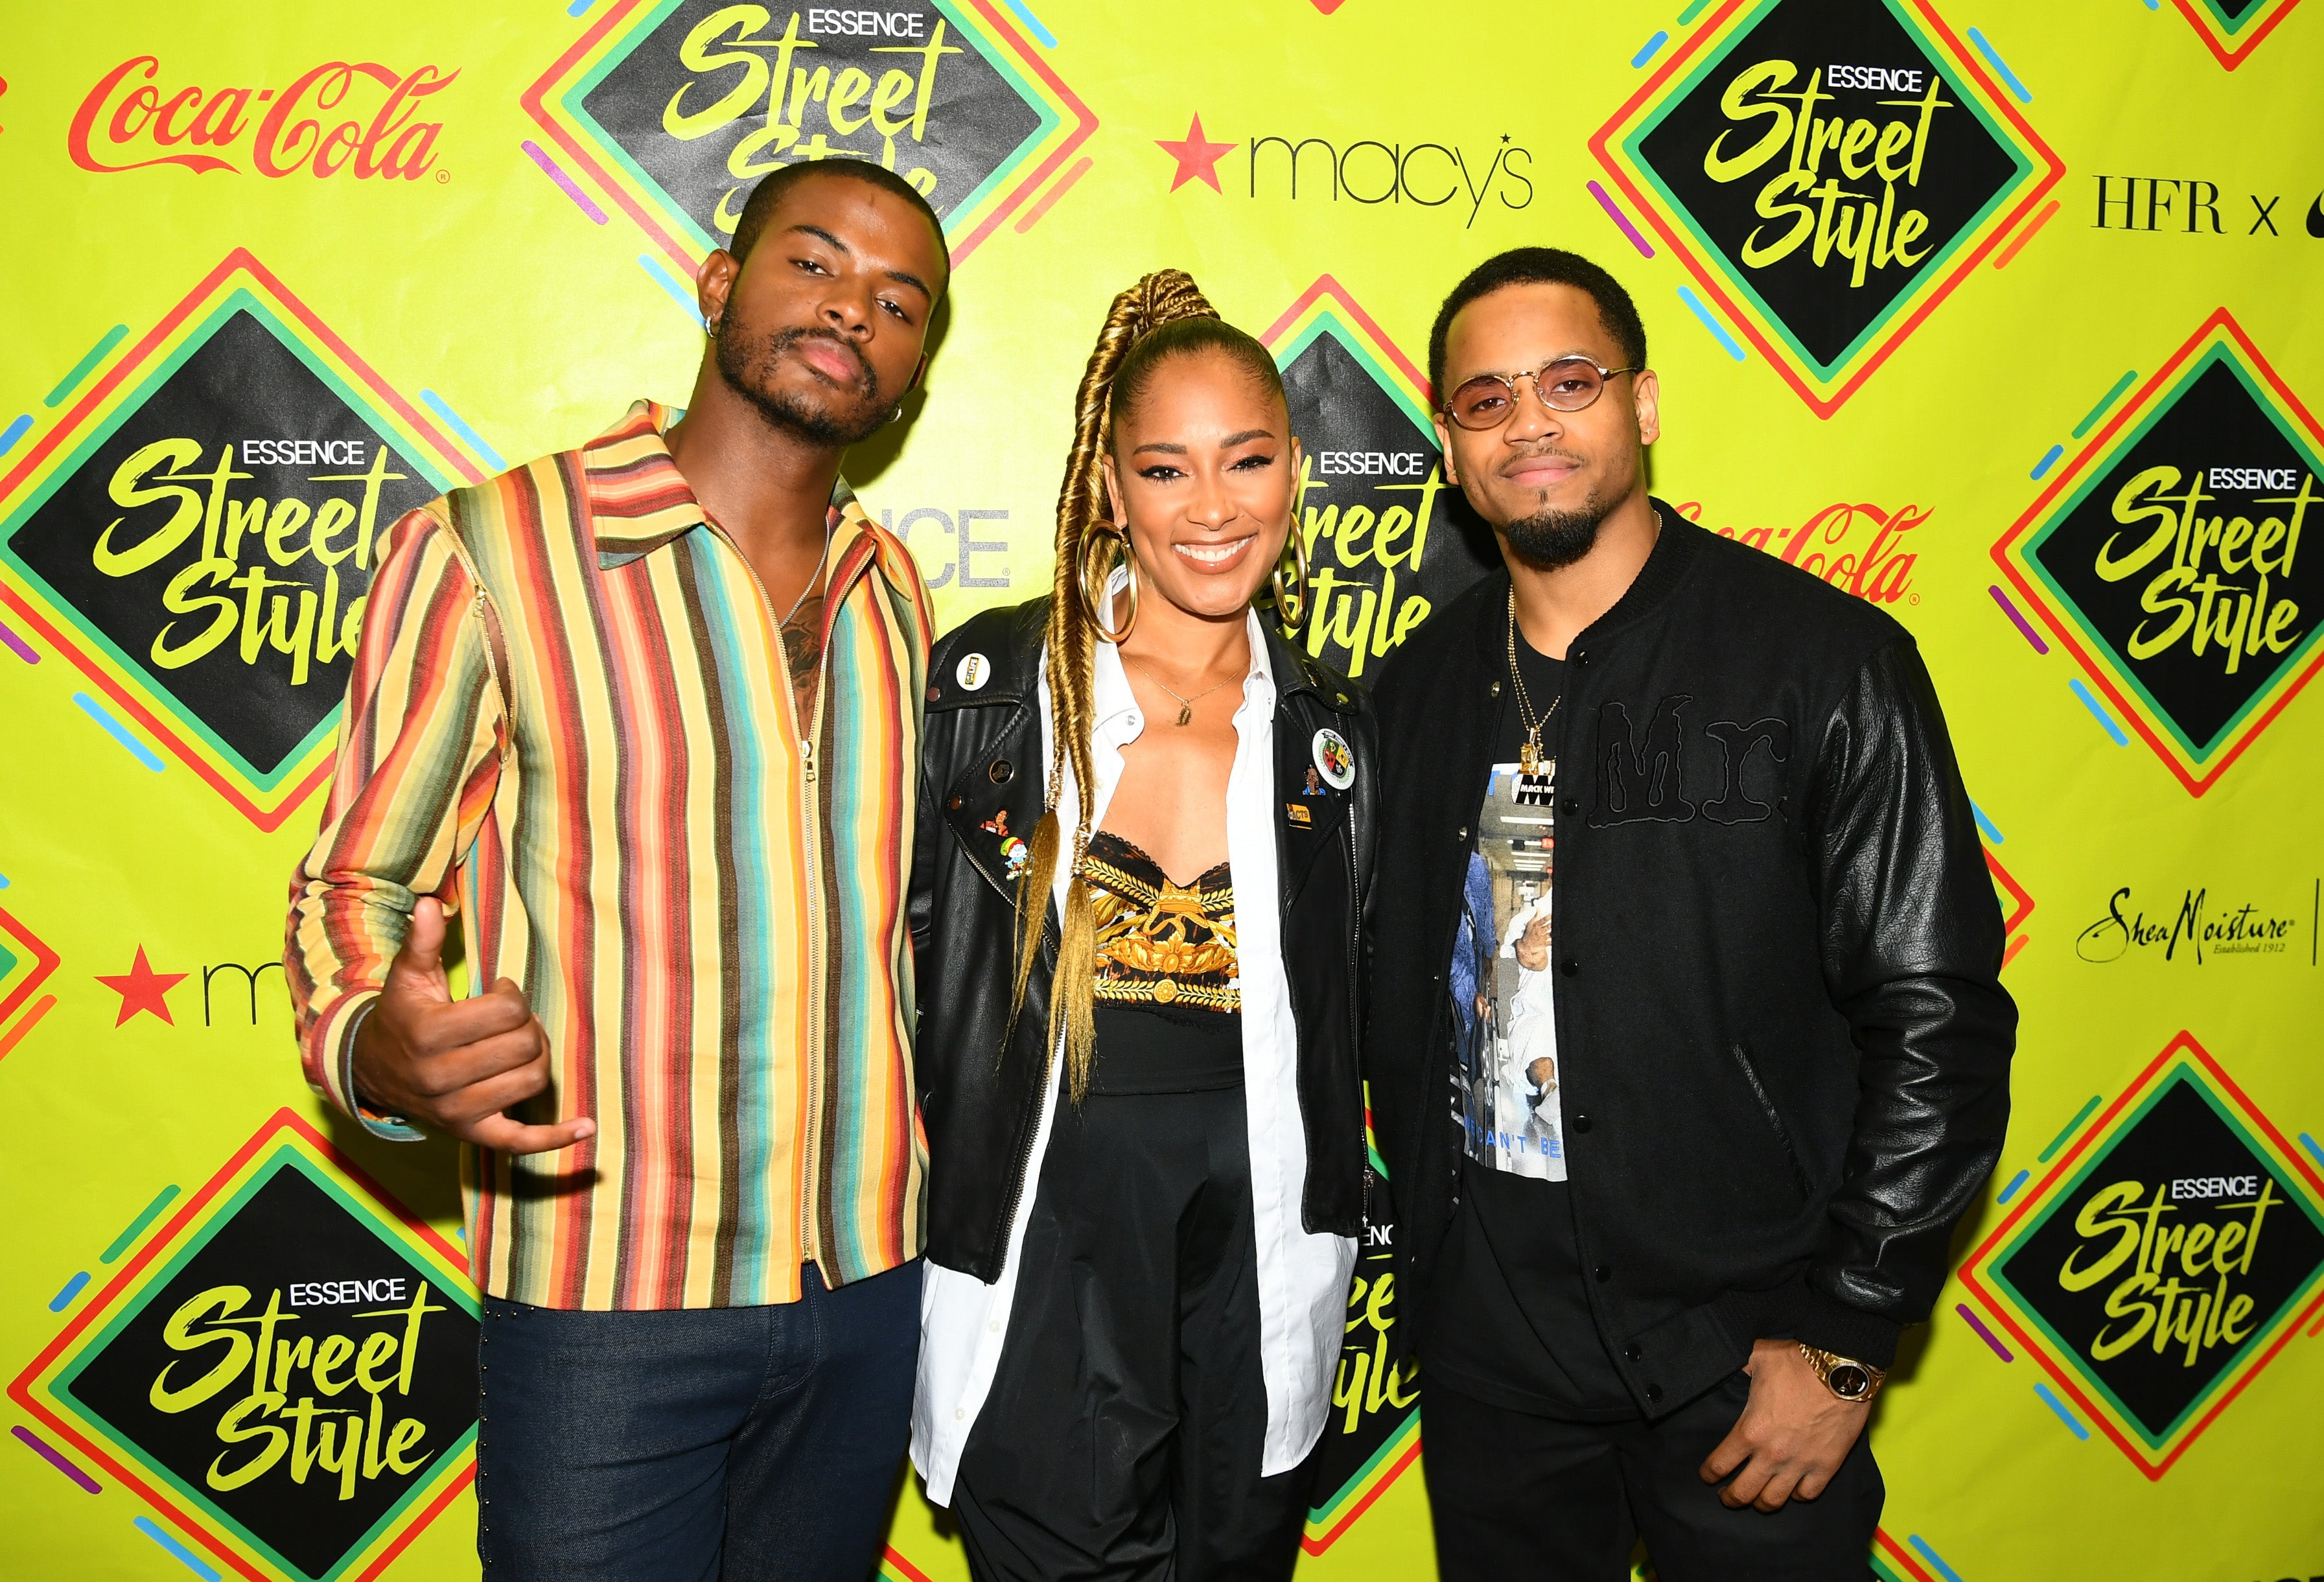 This Video Of Amanda Seales, Trevor Jackson And Mack Wilds Performing 'Can You Stand The Rain' Will Make Your Day